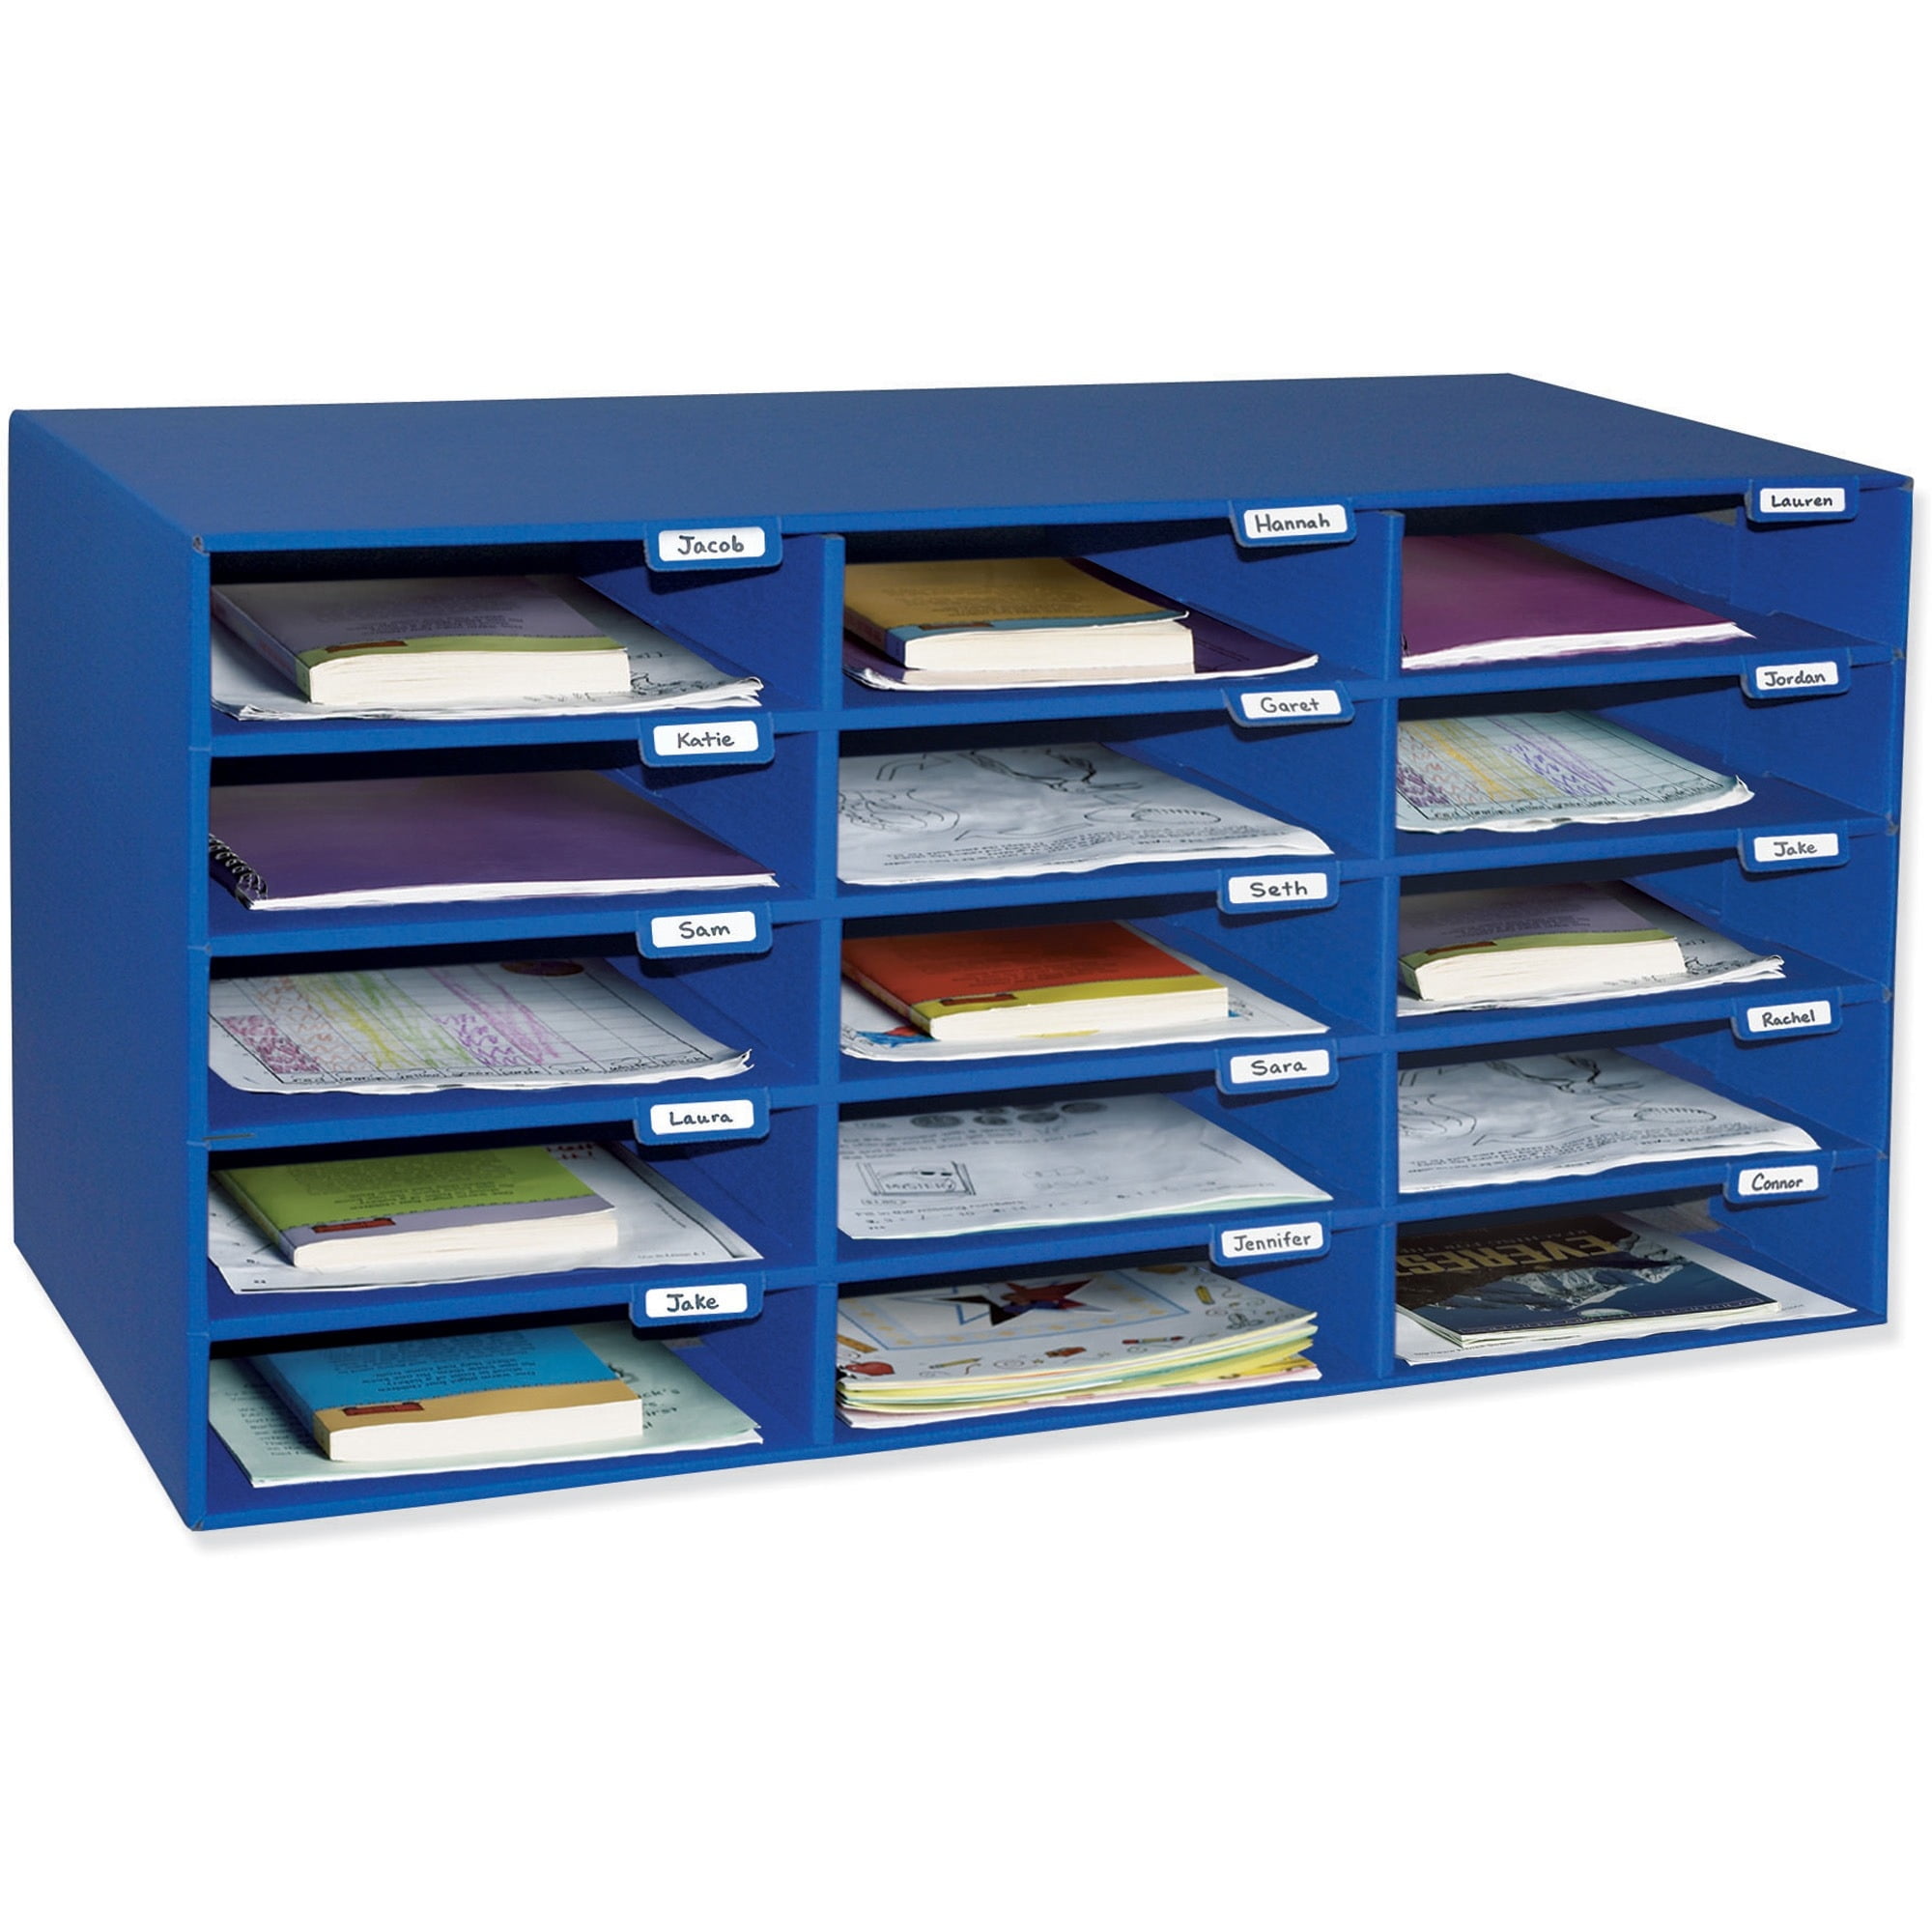 Classroom Keepers 12-1/2in x 10in x 3in Blue 15-Slots/Compartments Mailbox 